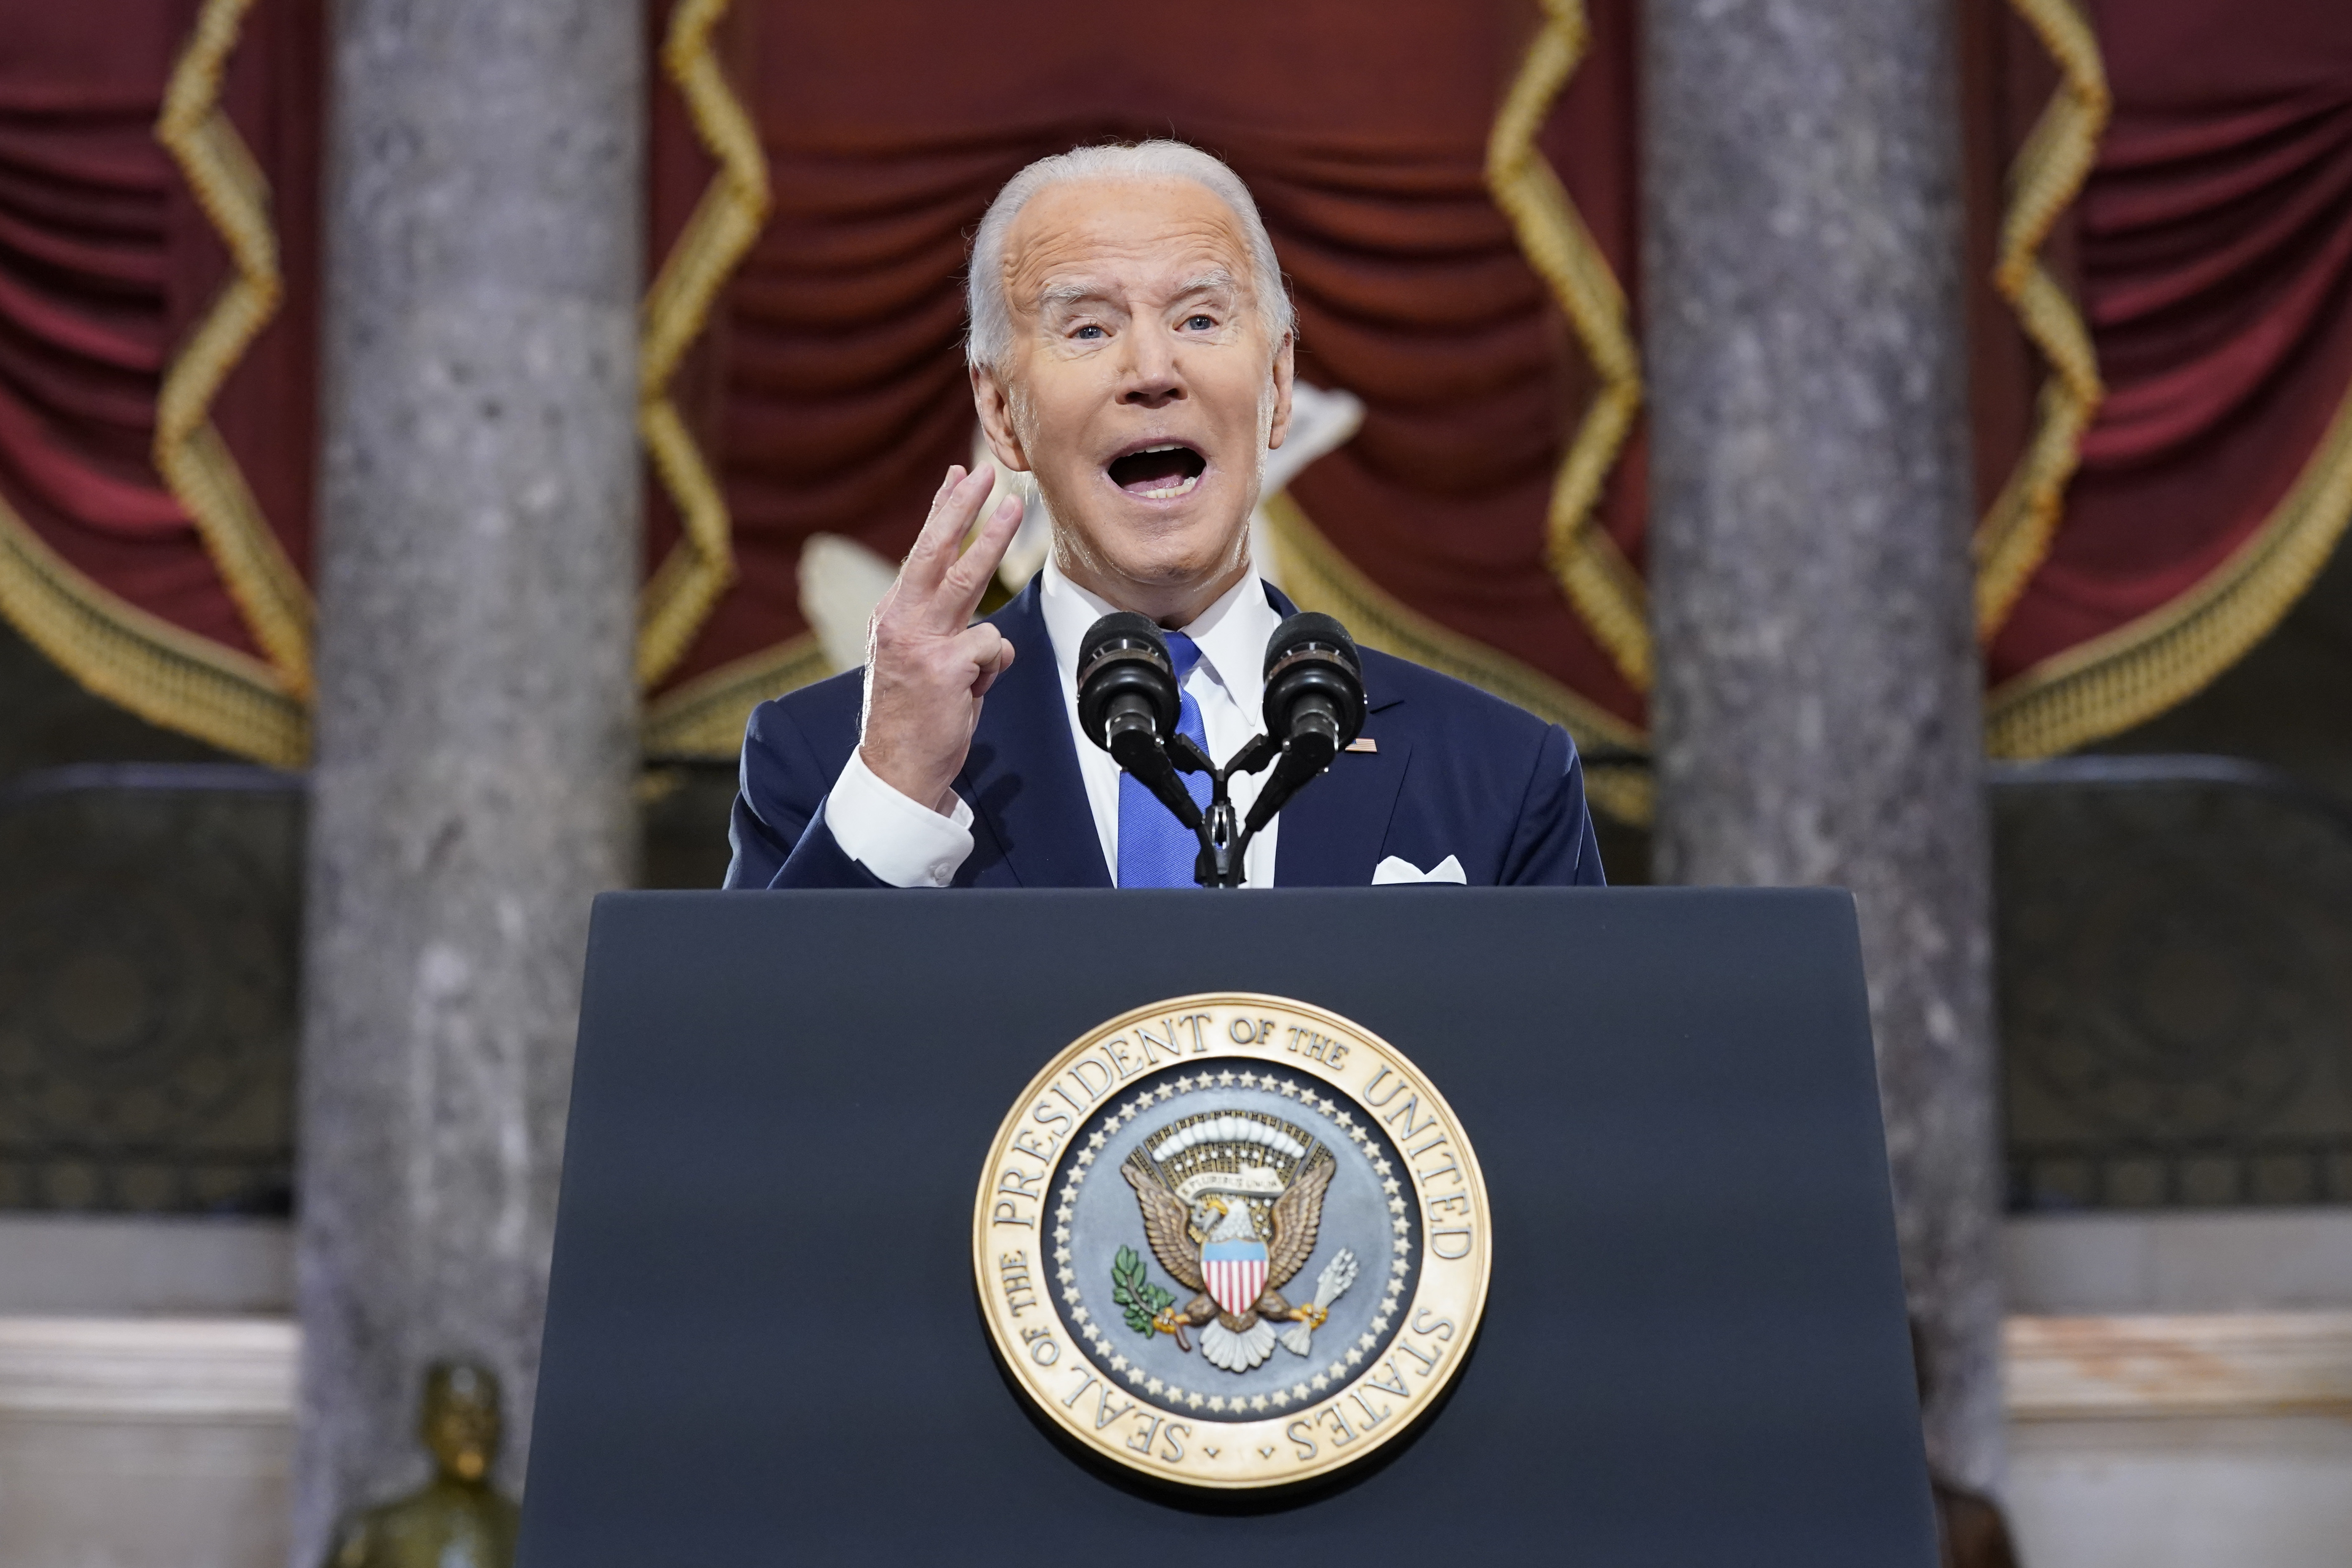 President Joe Biden speaks from Statuary Hall at the U.S. Capitol to mark the one year anniversary of the Jan. 6 riot at the Capitol by supporters loyal to then-President Donald Trump, Thursday, Jan. 6, 2022, in Washington. 